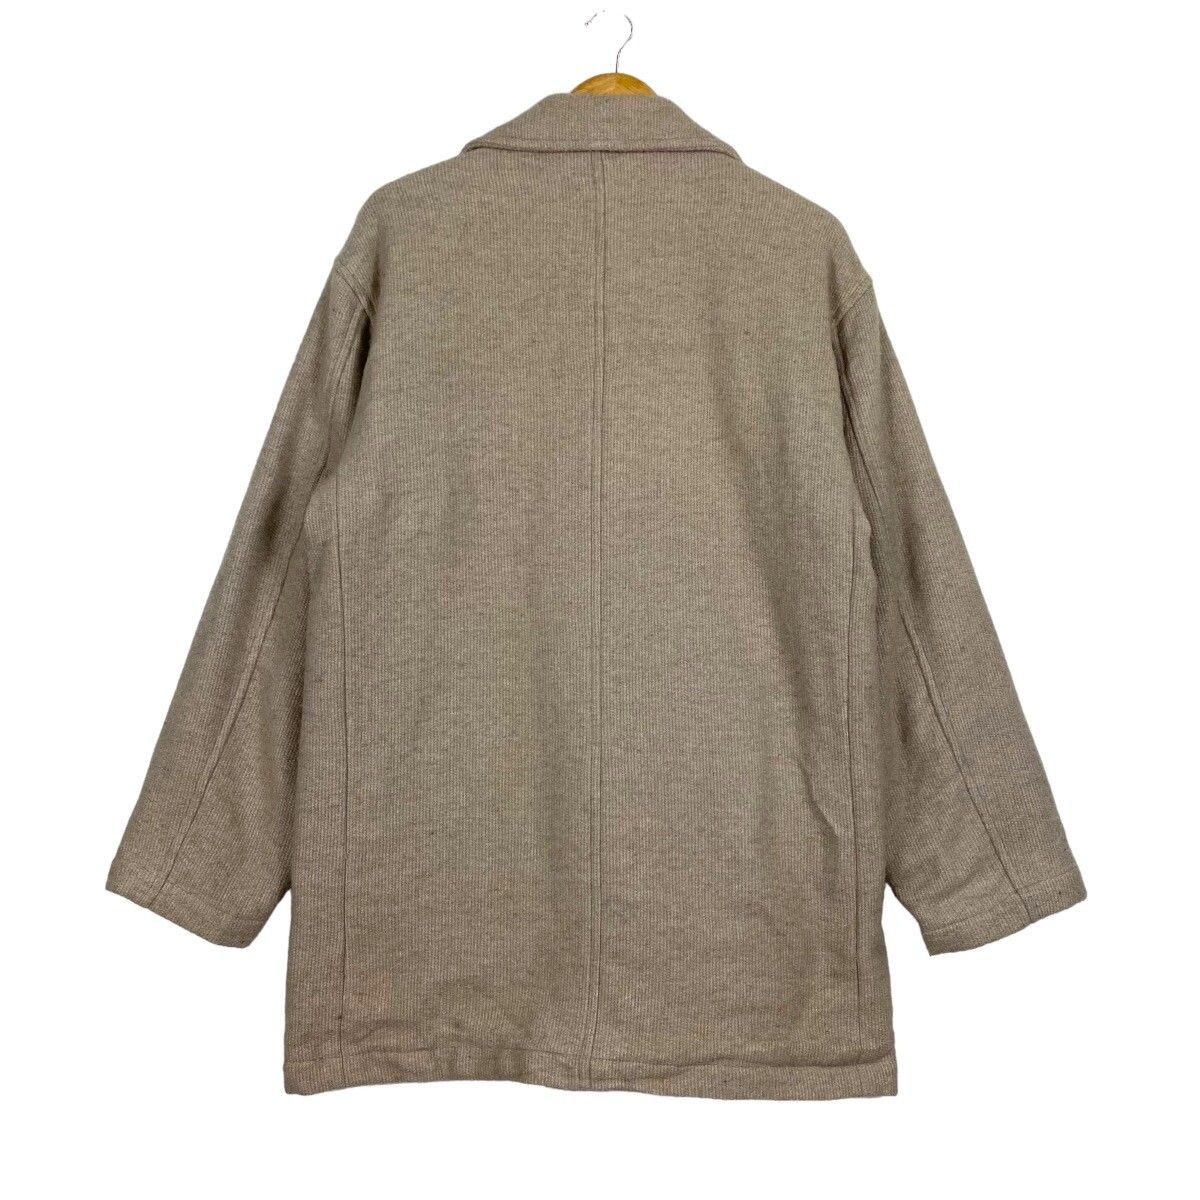 Nigel Cabourn Button Jacket Made In Japan - 10